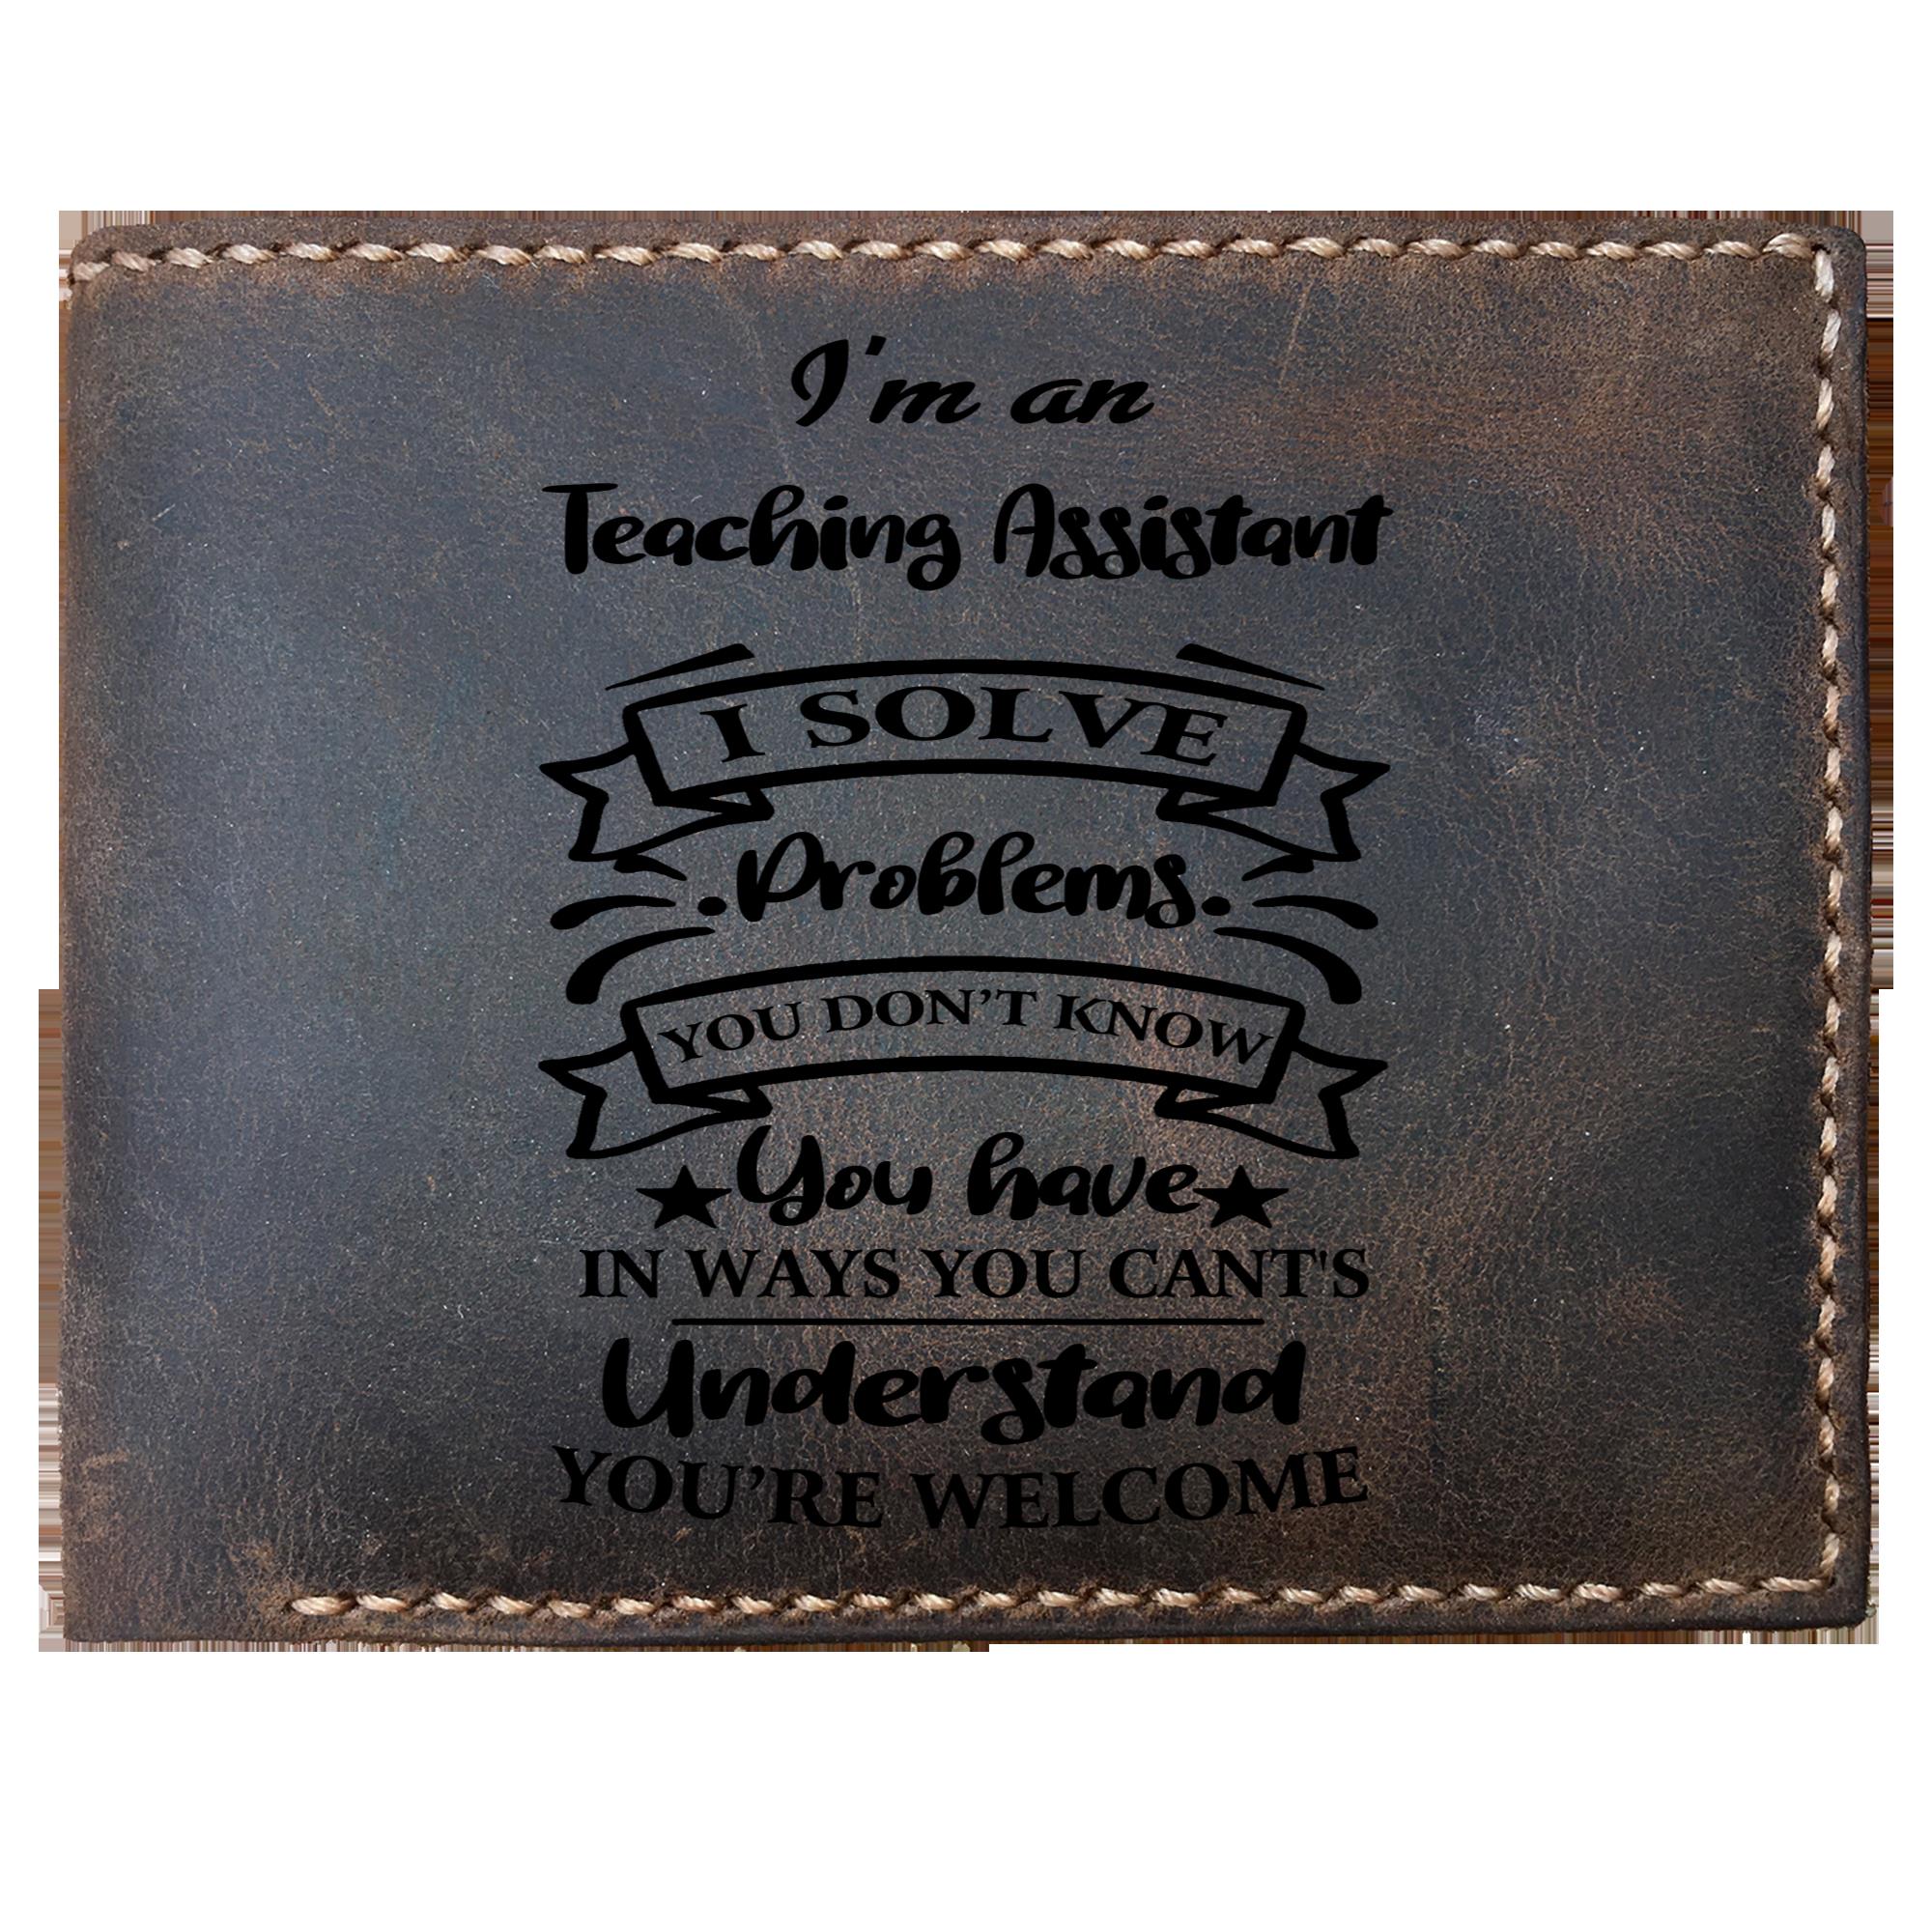 Skitongifts Funny Custom Laser Engraved Bifold Leather Wallet For Men, I'm an Teaching Assistant Solve Problems, Father's Day Gifts